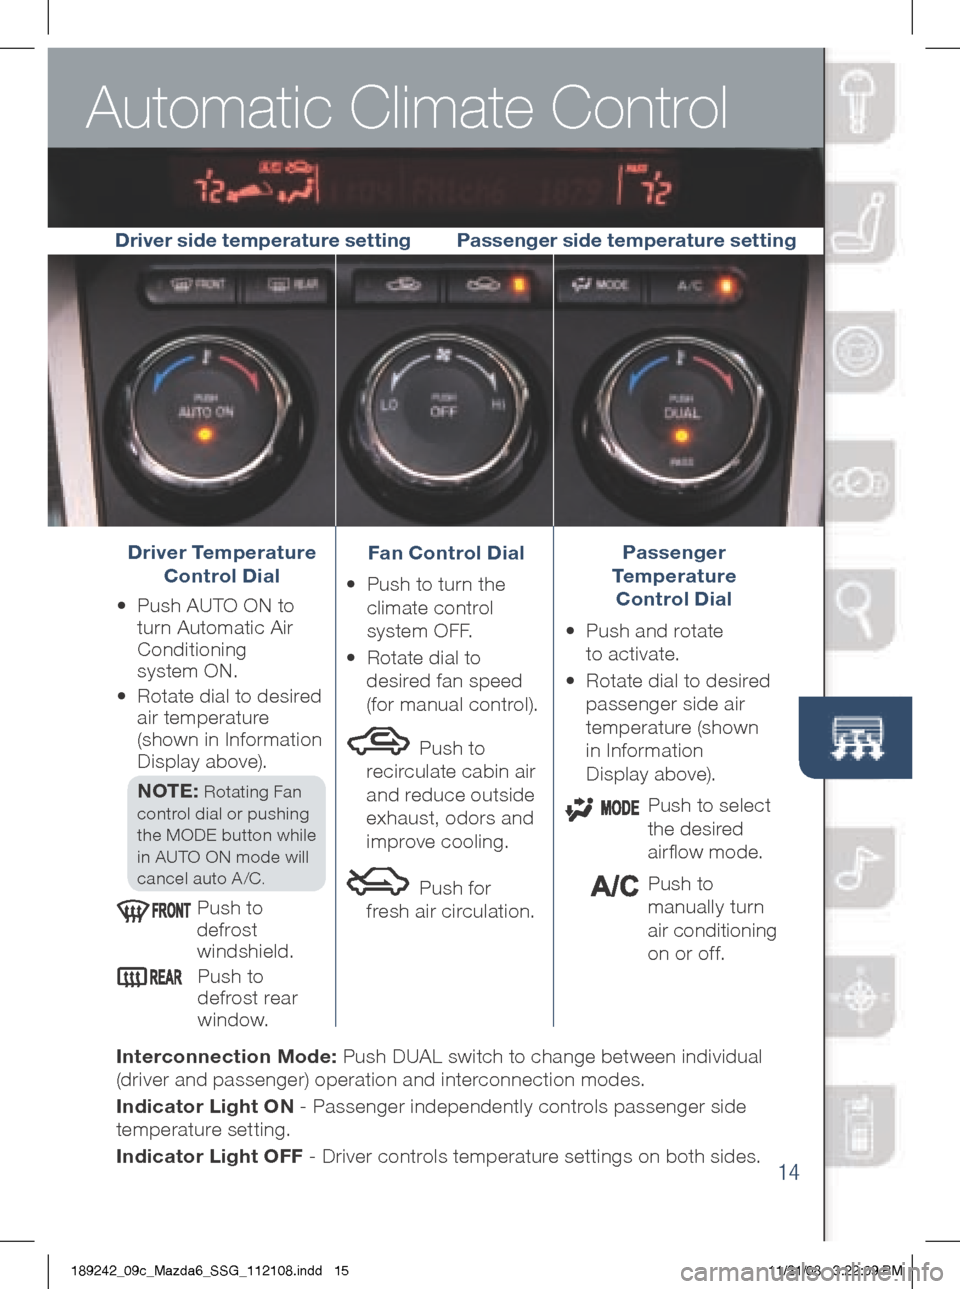 MAZDA MODEL 6 2009  Smart Start Guide (in English) Automatic Climate Control
14
Driver Temperature  
Control Dial
•	 	
Push 	AUTO 	ON 	to	
turn	Automatic	Air 	
Conditioning	  
system	ON. 	
•	 	
Rotate	dial	to	desired 	
air 	temperature	  
(shown	i